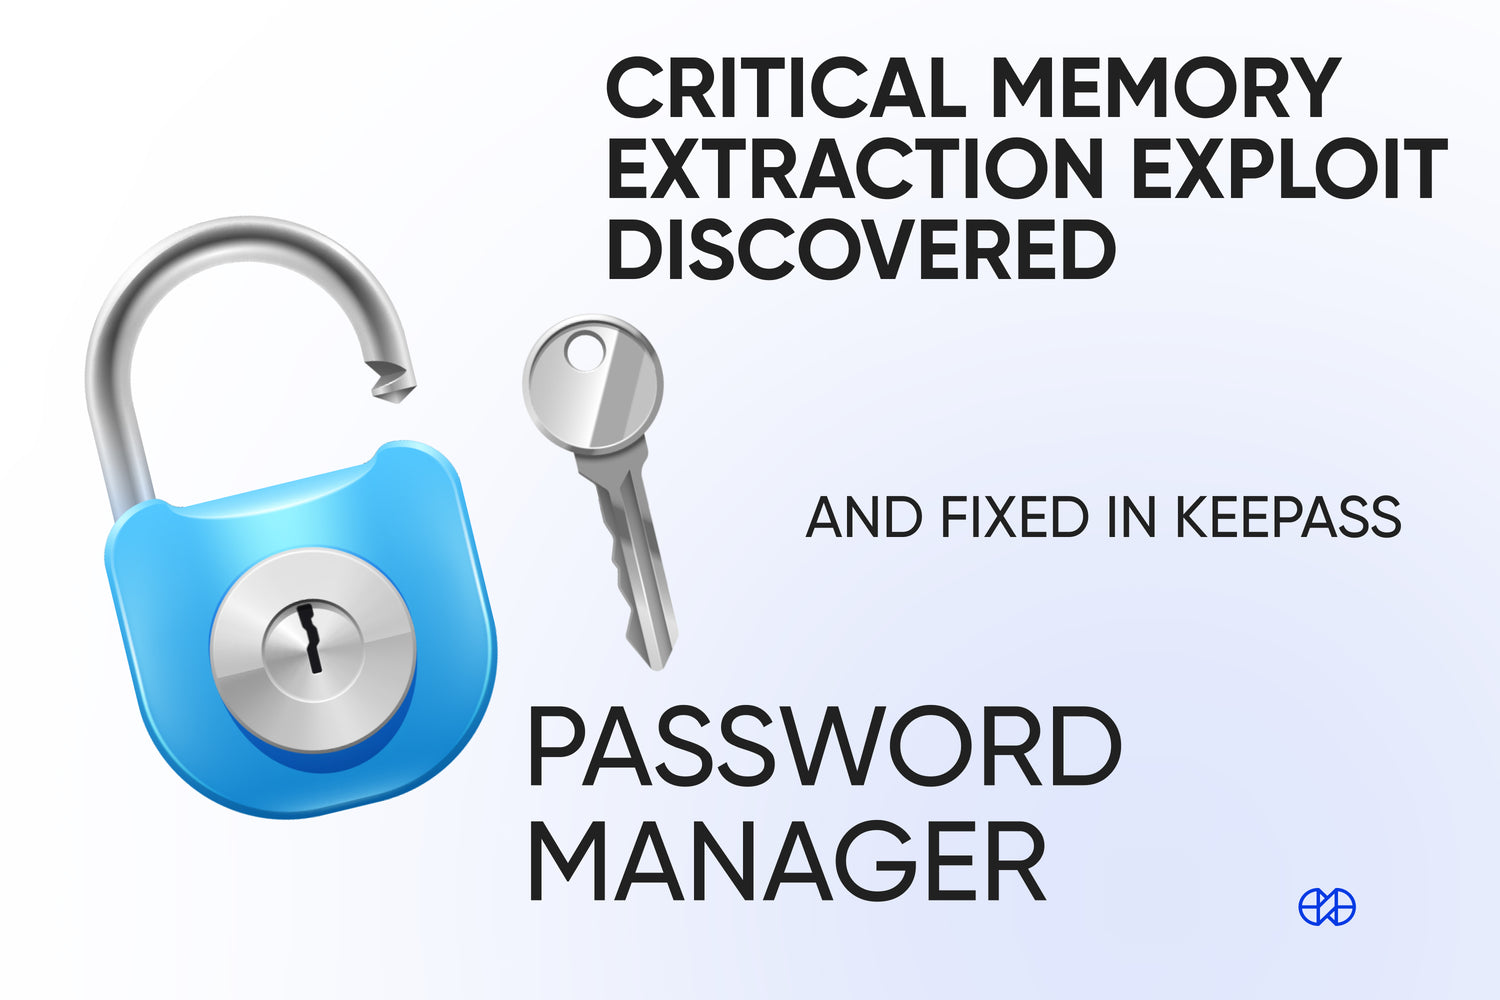 Critical memory-extraction exploit discovered and fixed in KeePass password manager